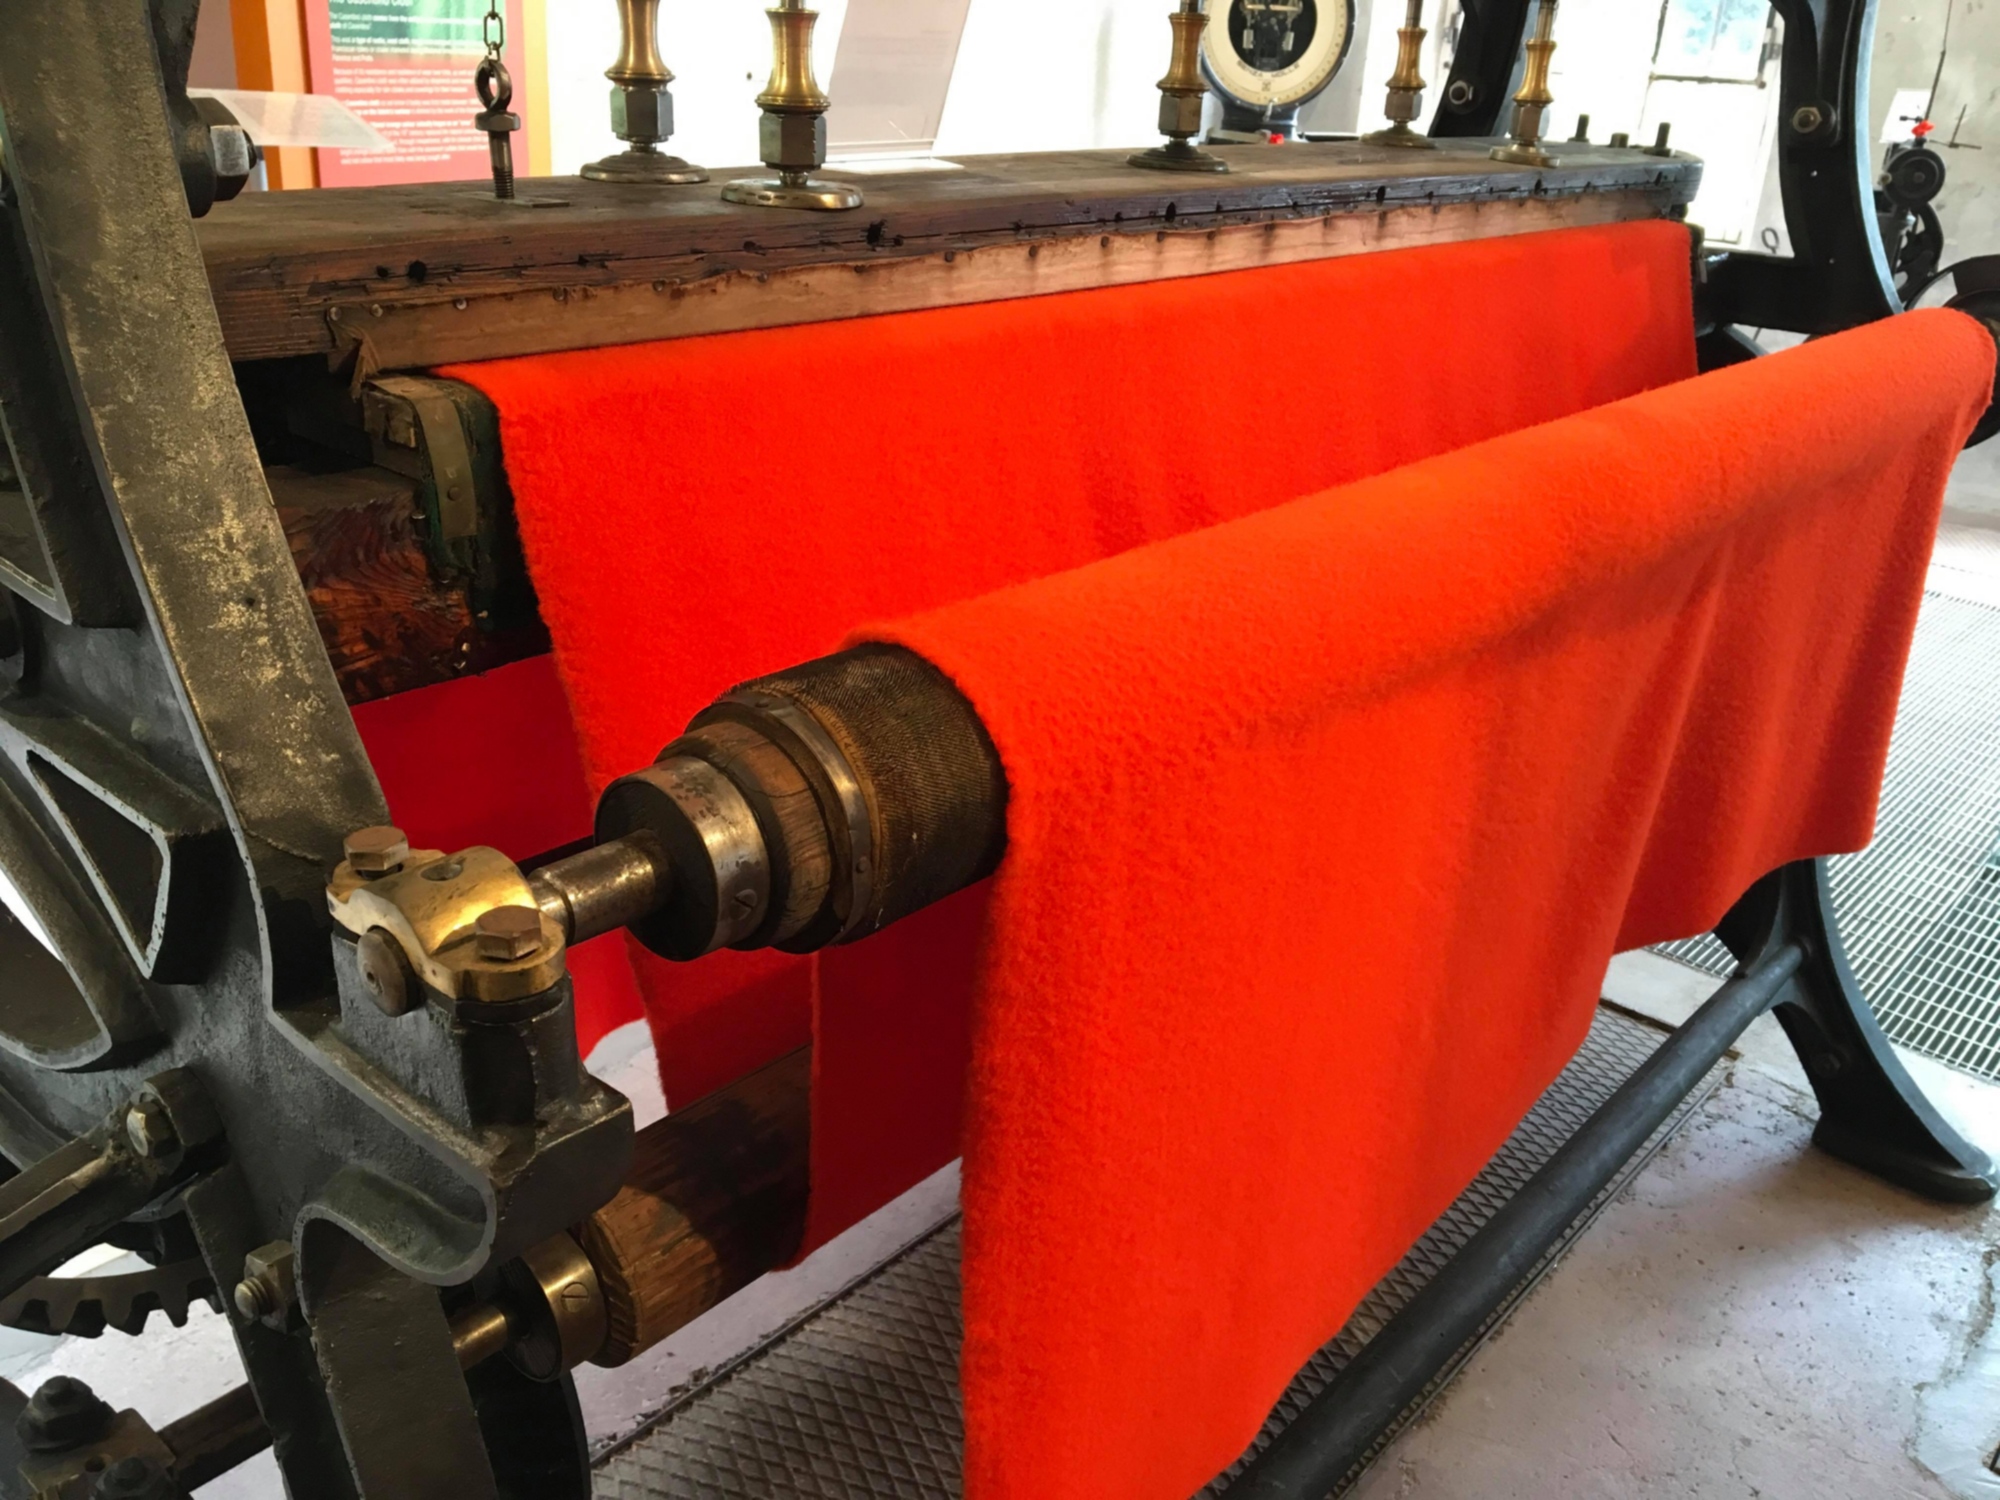 The typical orange color of Casentino cloth